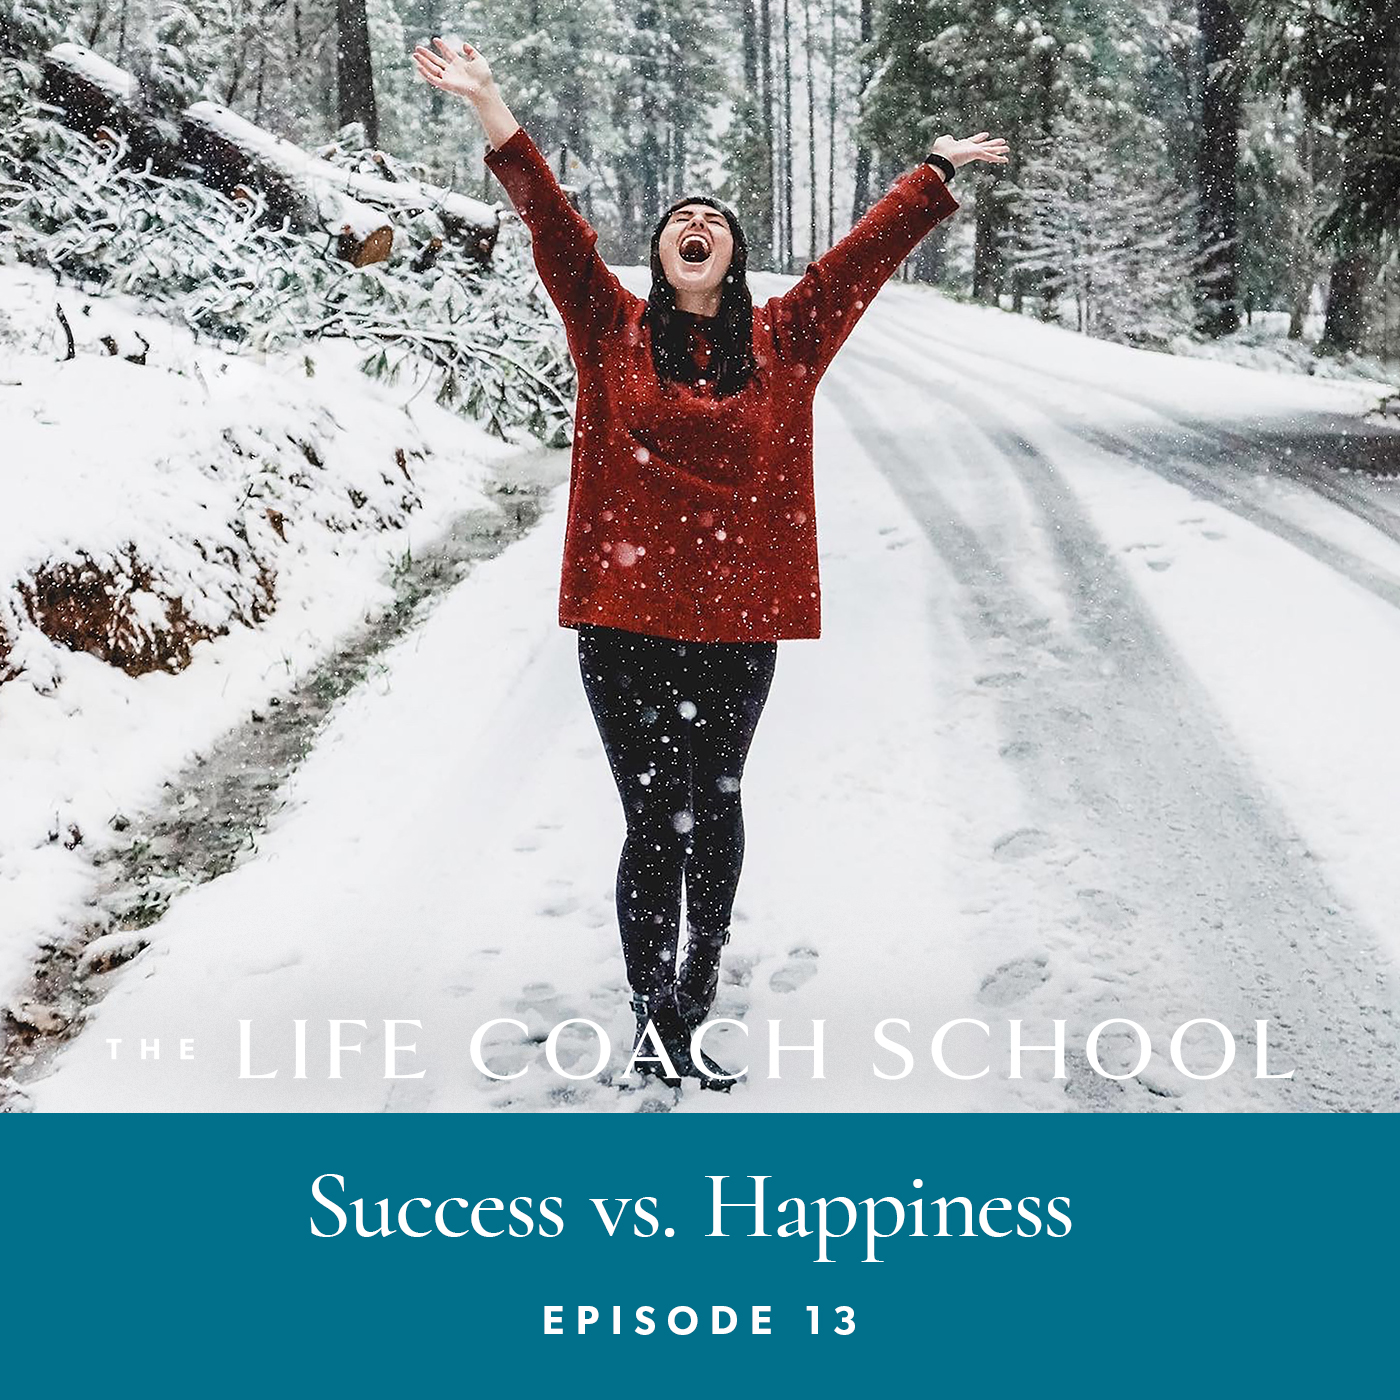 The Life Coach School Podcast with Brooke Castillo | Episode 13 | Success vs. Happiness